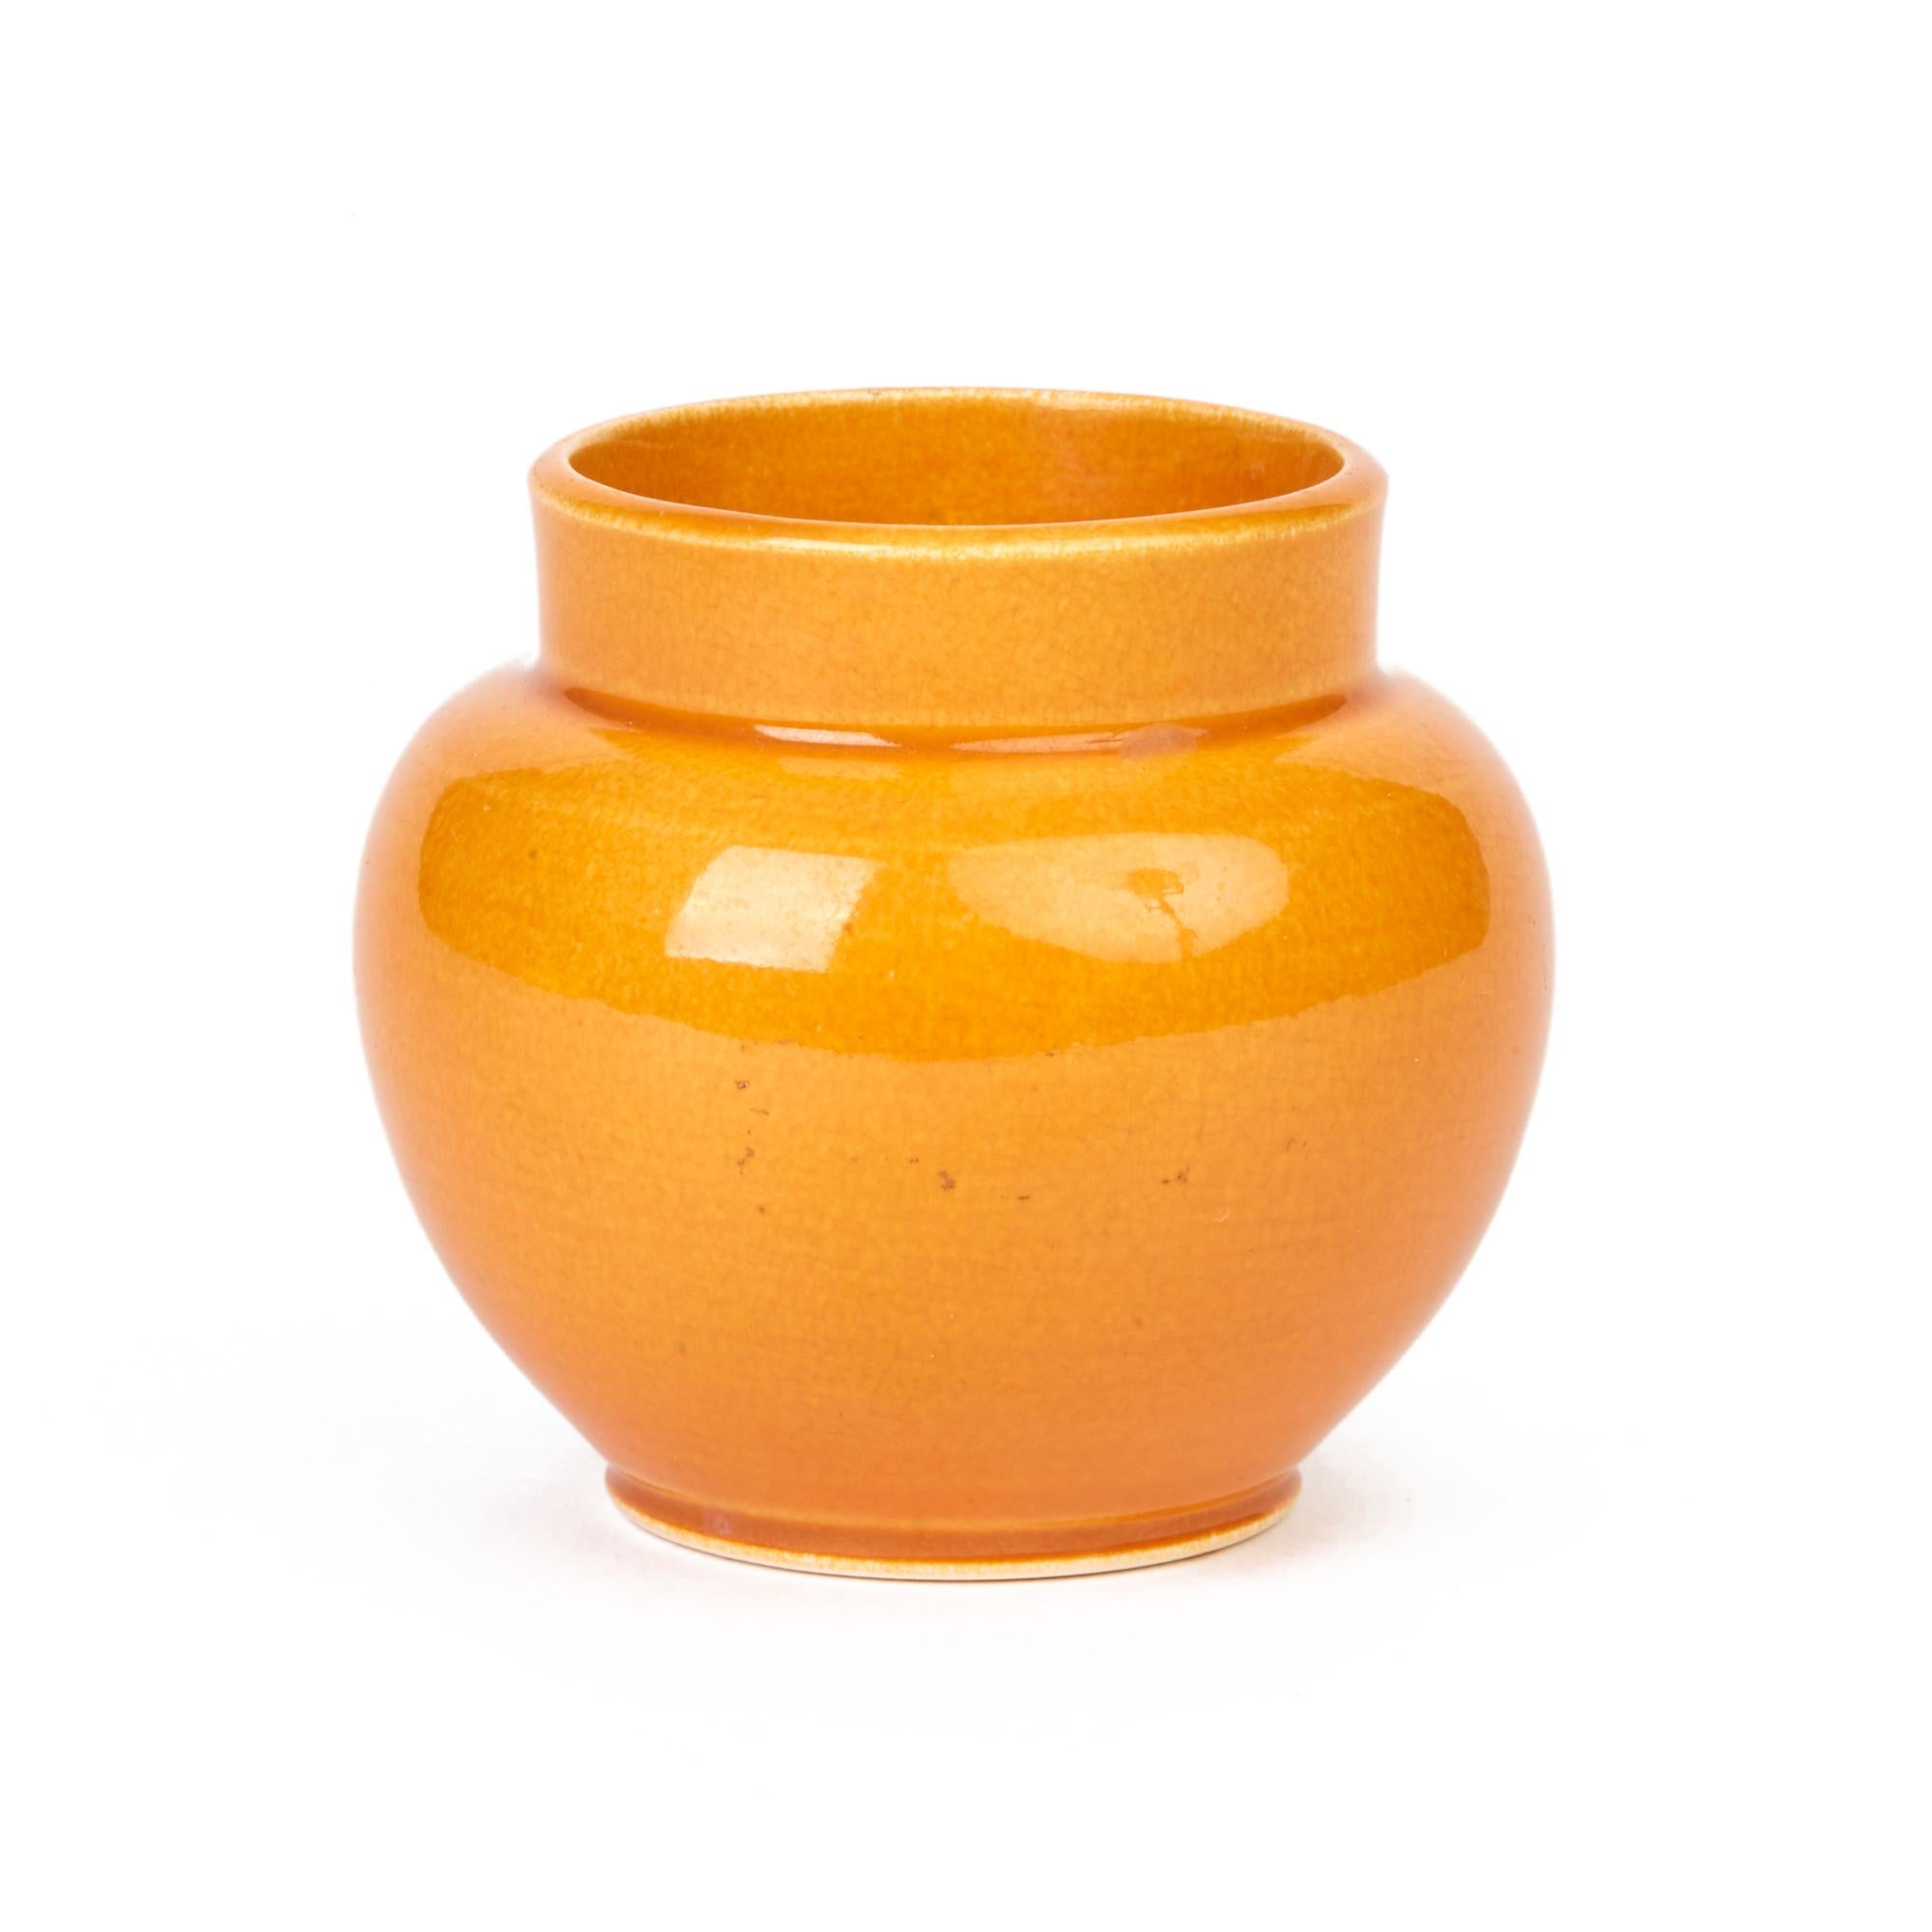 A rare English Arts & Crafts miniature art pottery vase by Samuel Lear decorated in orange Majolica glazes. The small rounded bulbous vase stands on a narrow rounded foot with a short funnel shaped top. The vase is decorated in bright orange glazes